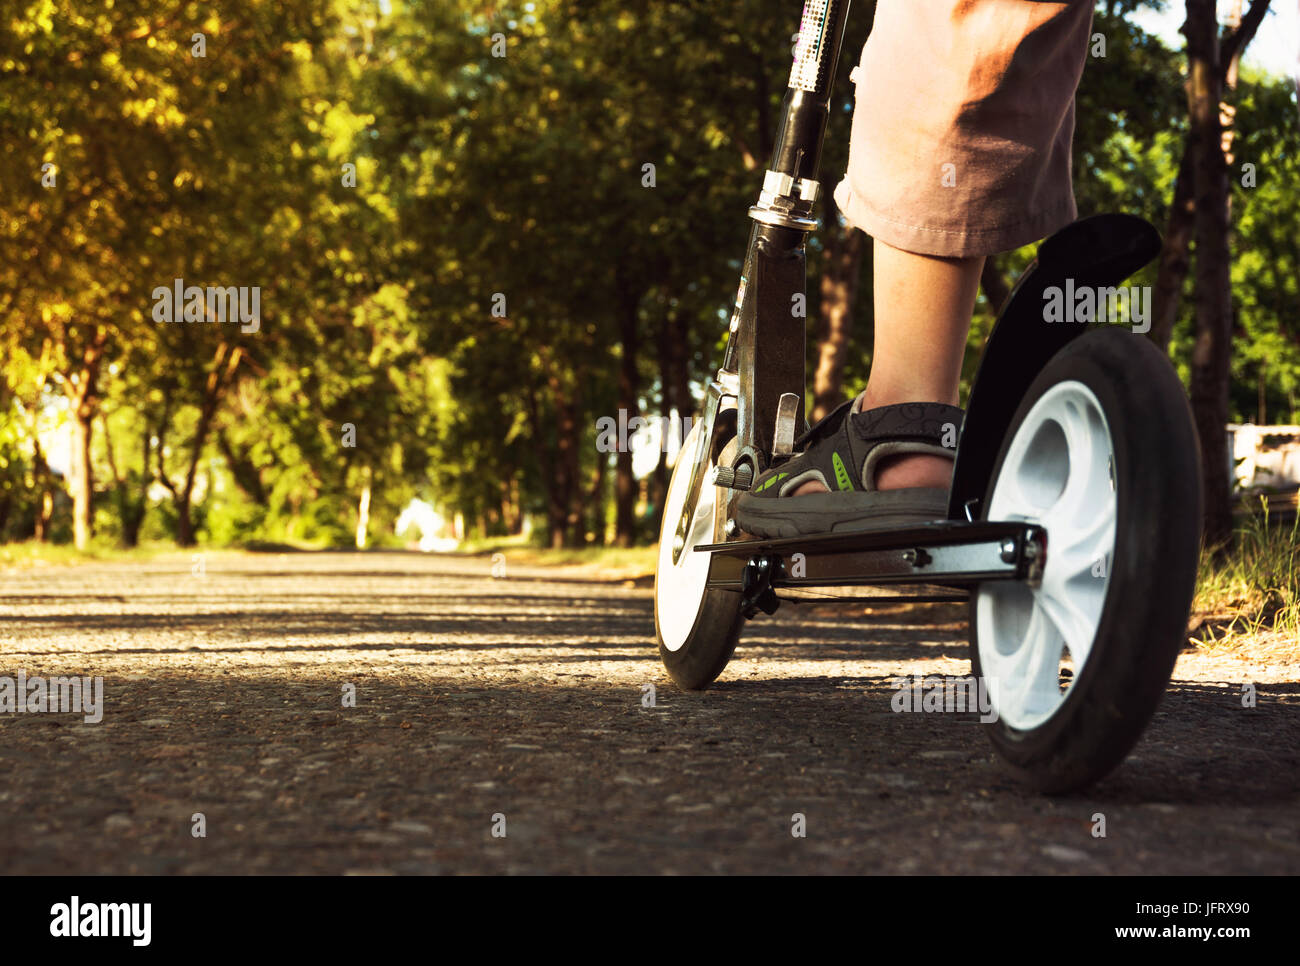 Child's feet in sandals standing on the scooter. black scooter wheels. at scooter's Stock Photo